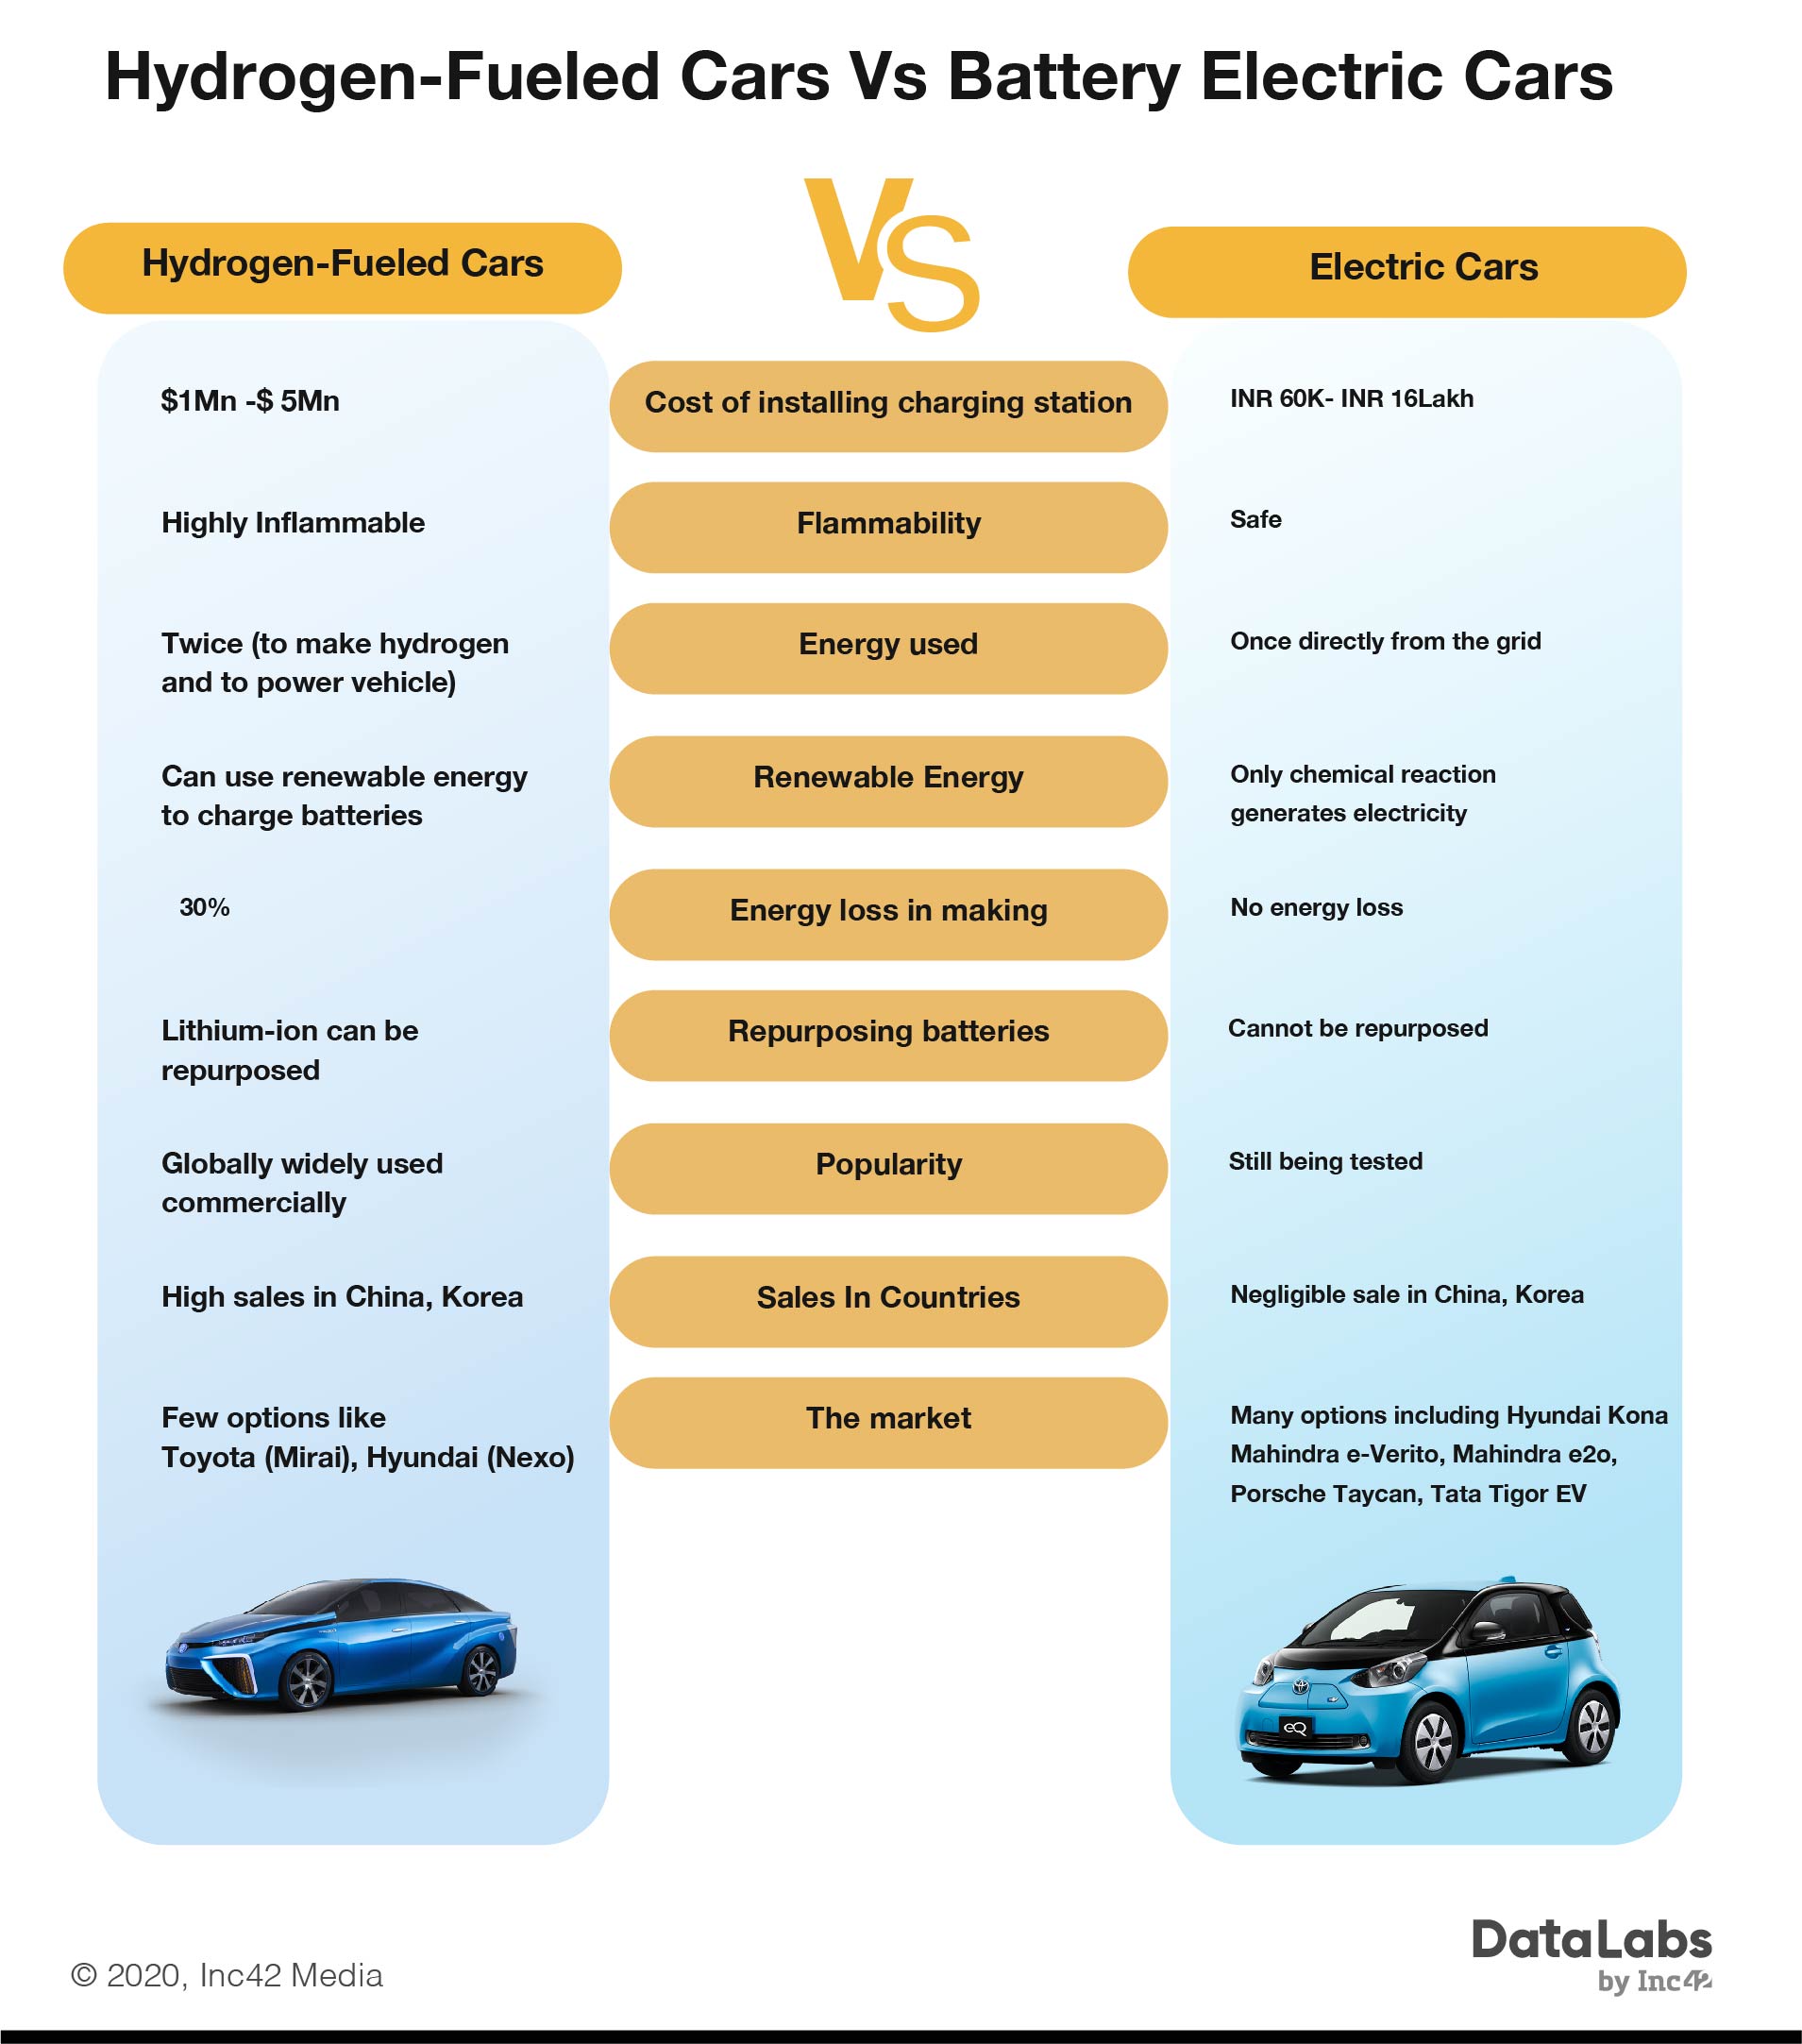 Are Battery-Powered EVs Greener Than Hydrogen Vehicles?